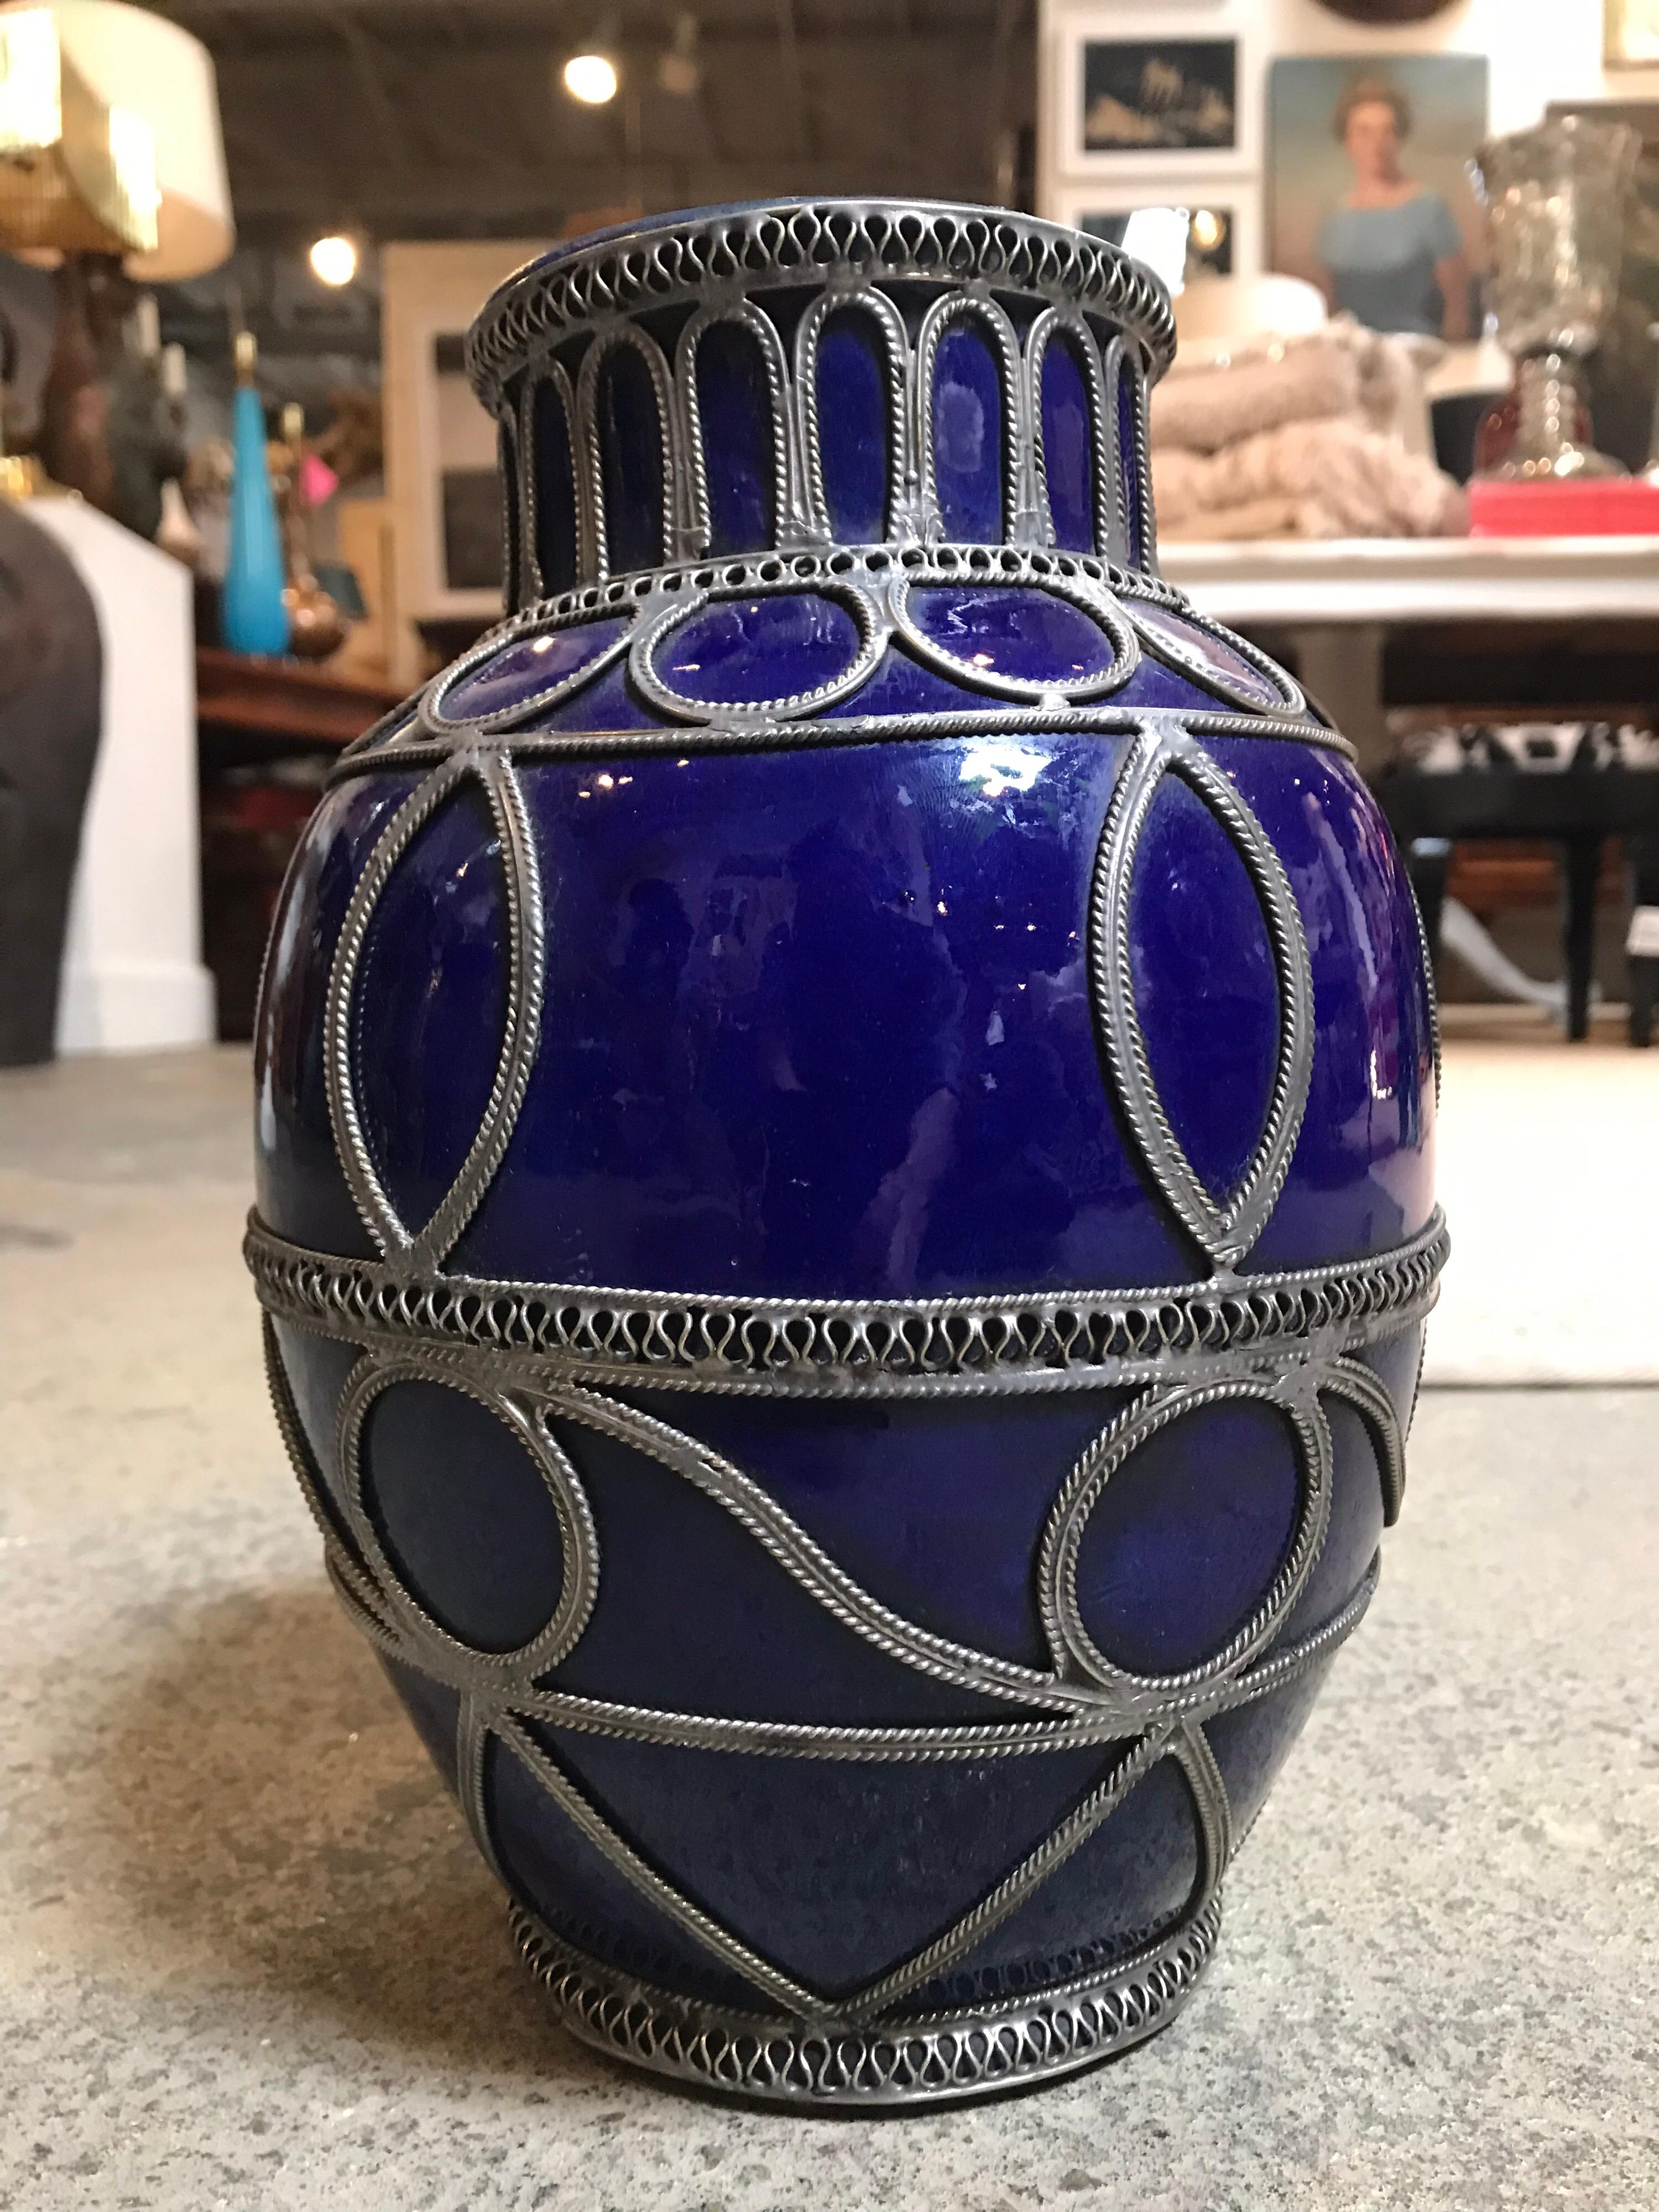 This small, dark blue Moroccan pot is hand painted and has a ceramic glaze. It is decorated with various ribbons of silver-like metal providing round geometric patterns throughout.